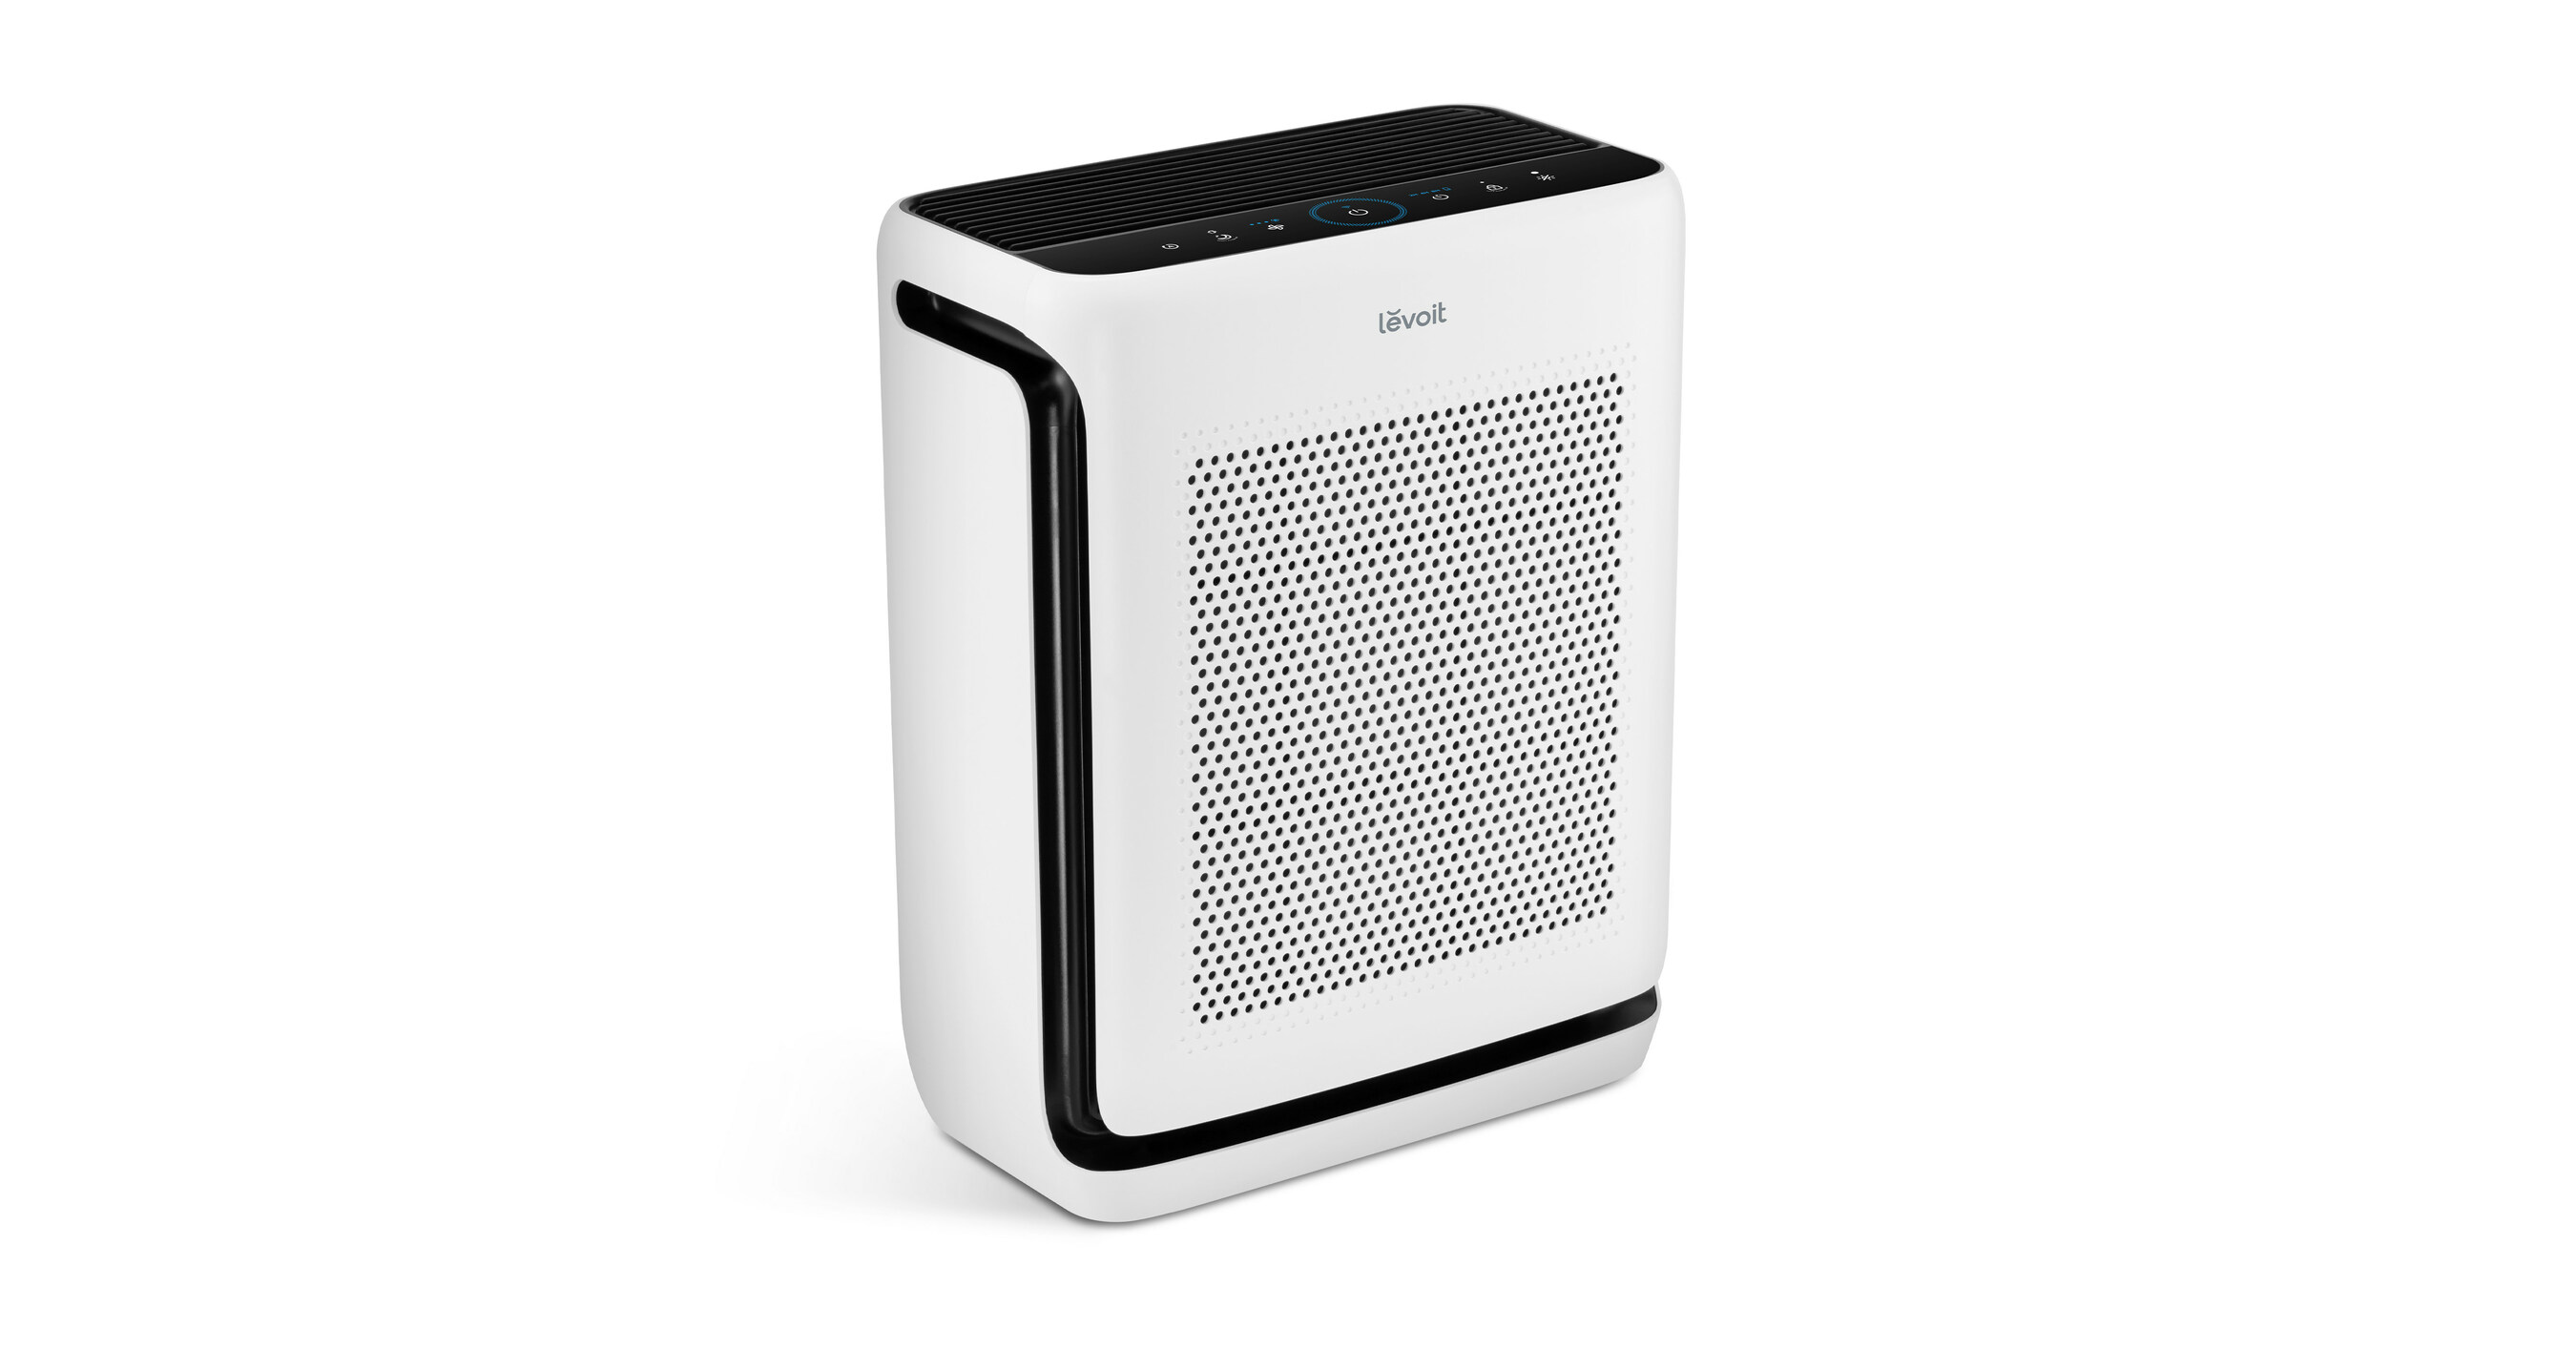 LEVOIT Air Purifiers for Bedroom Home, HEPA India